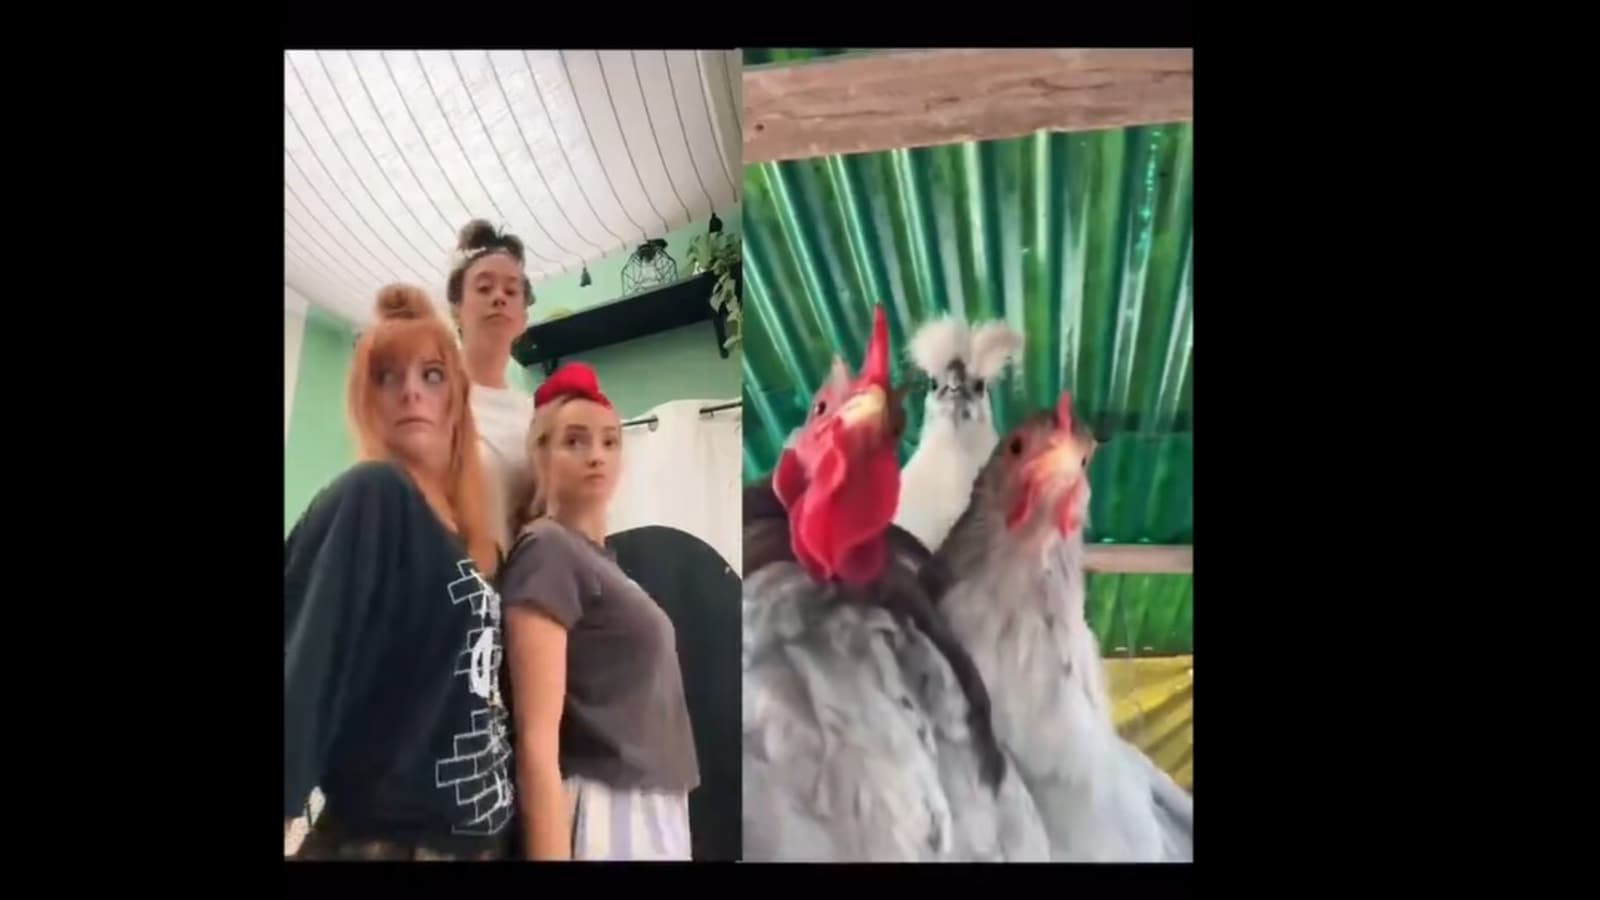 Christmas-themed chicken dance viral video has netizens in stitches; Know its origin, creators, more